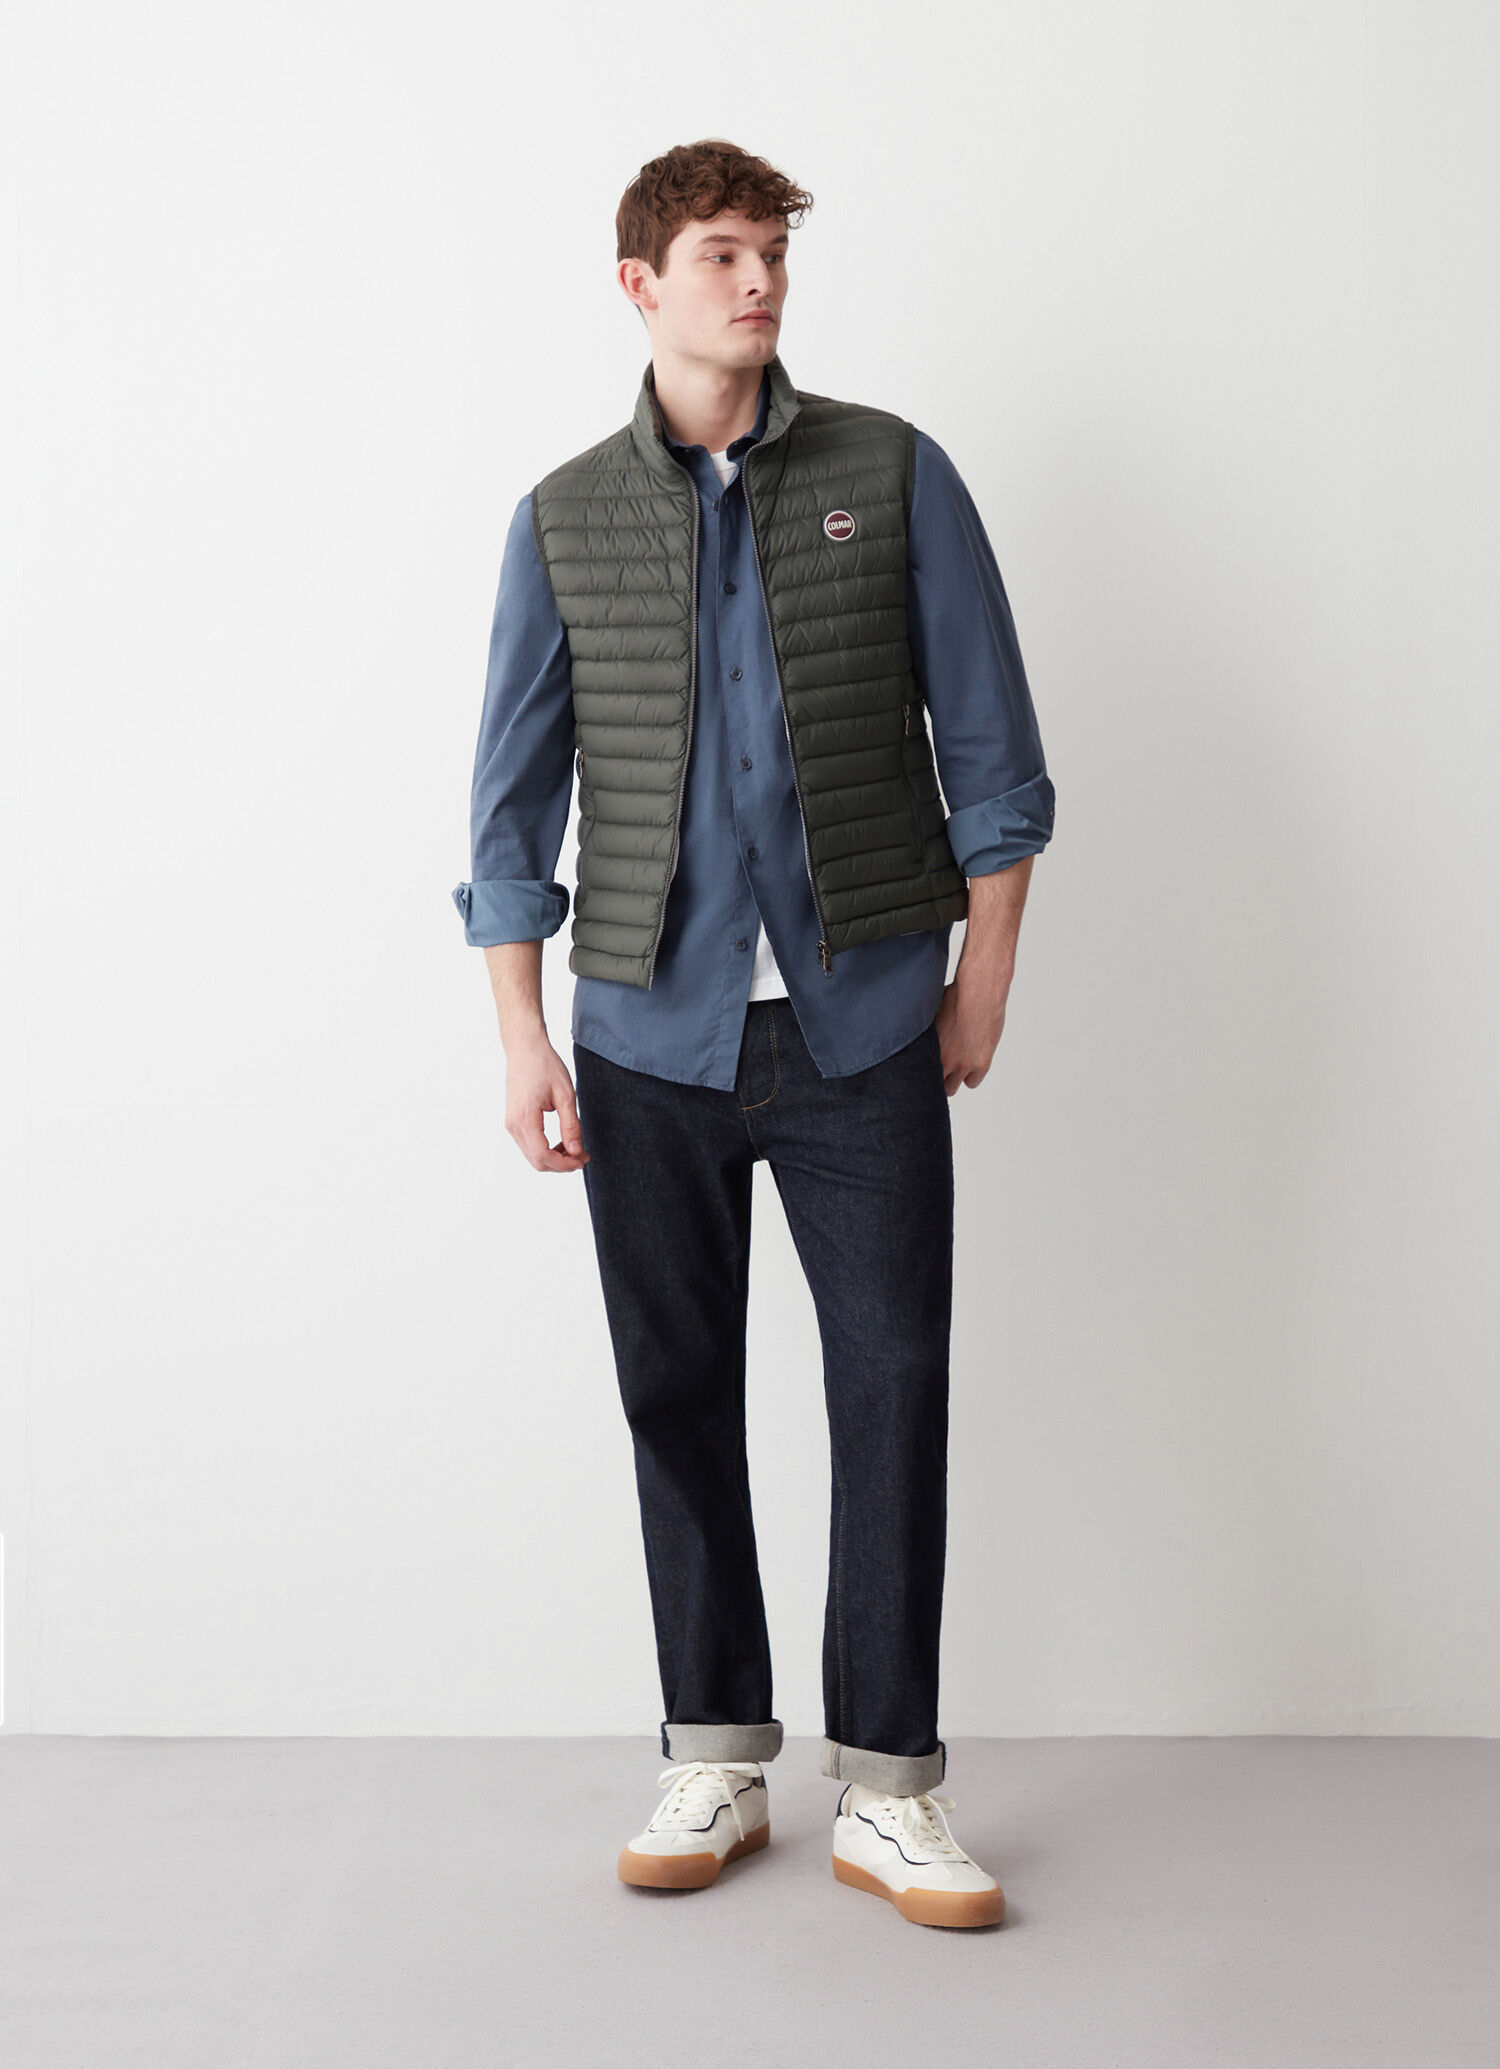 Gilets for men: down vest and sleeveless jackets | Colmar